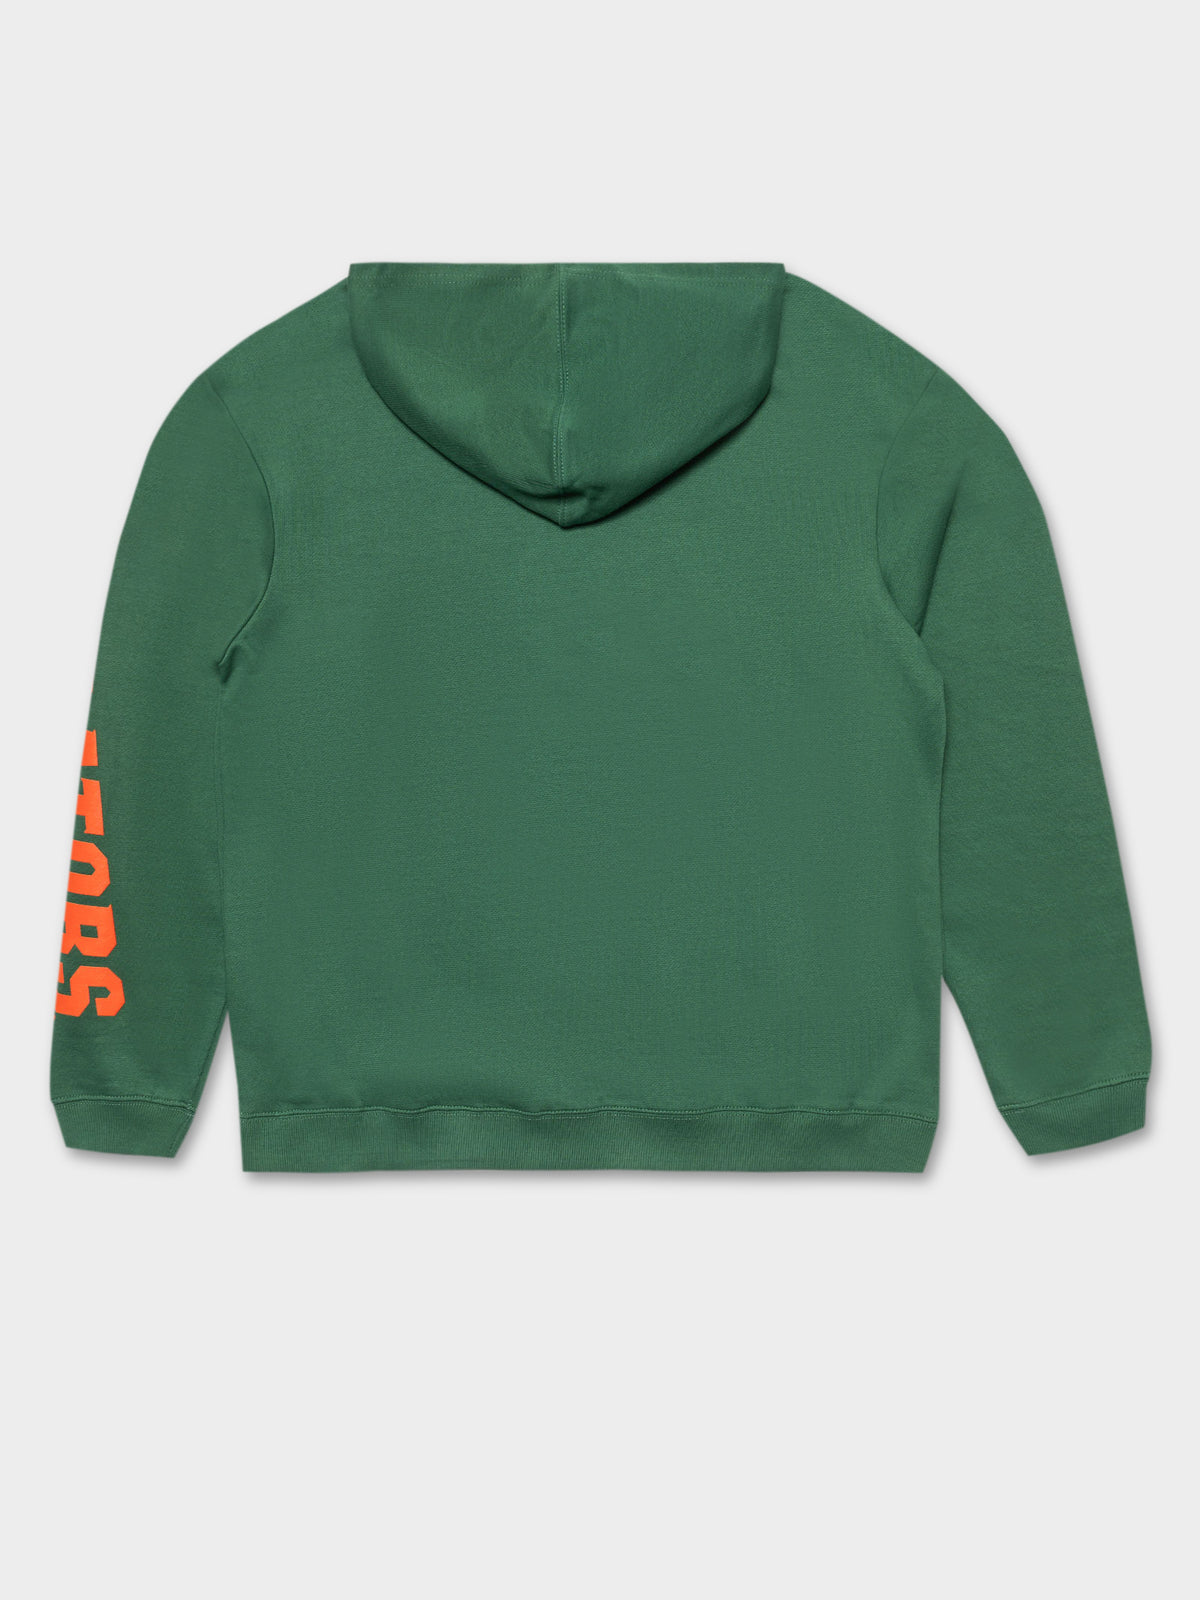 Florida NCAA Arched Puff Print Hoodie in Kelly Green